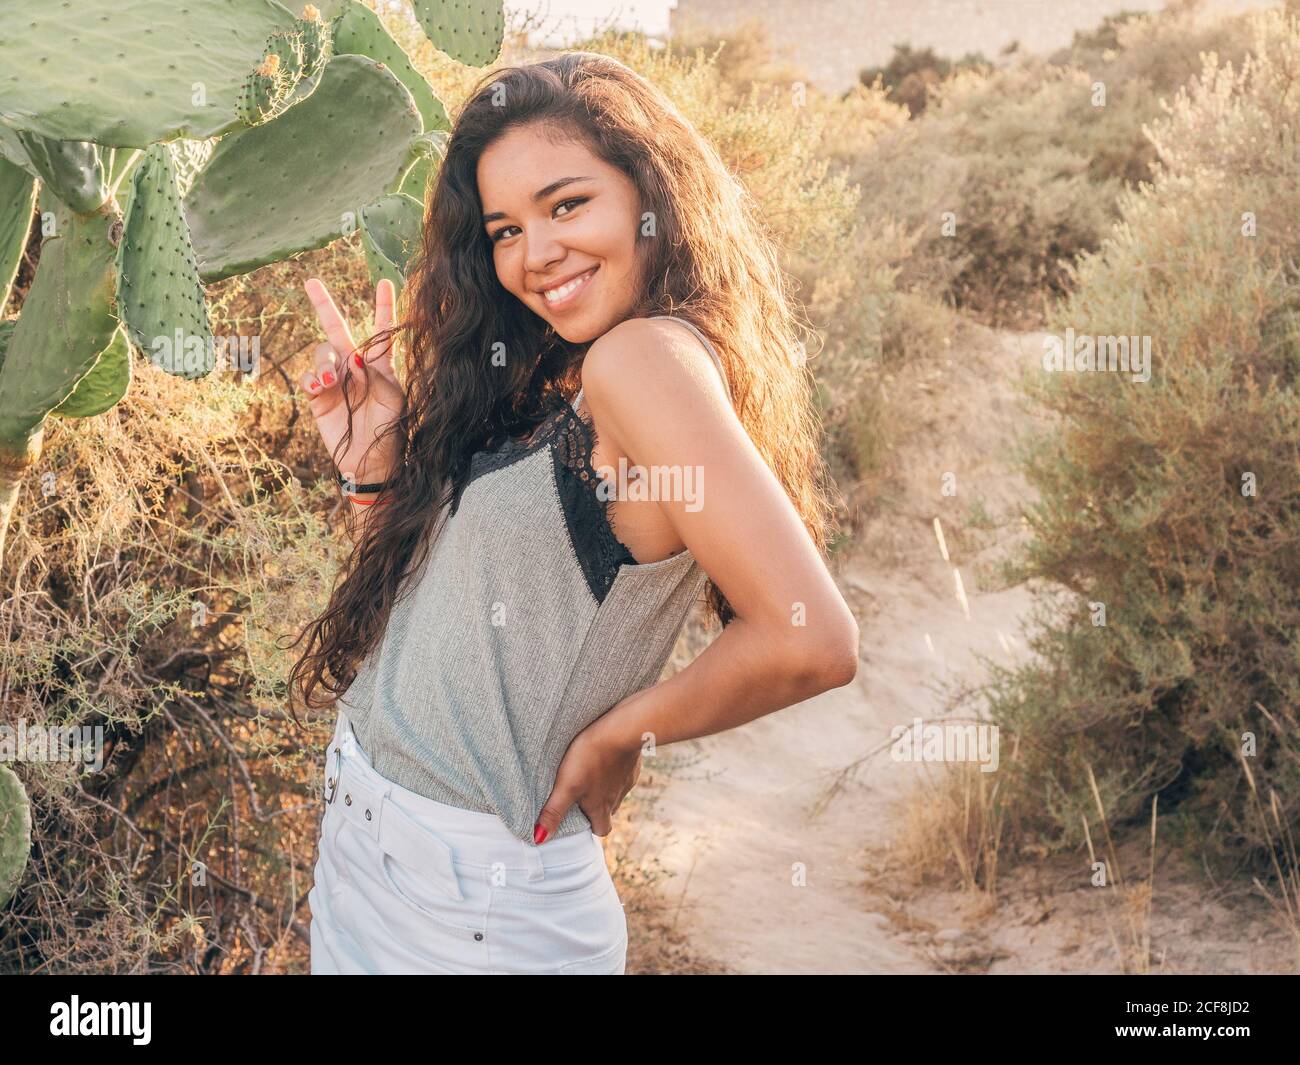 Smiling cheerful casual ethnic Woman standing beside cactus on sandy pathway amongst dry bushes in sunlight Stock Photo